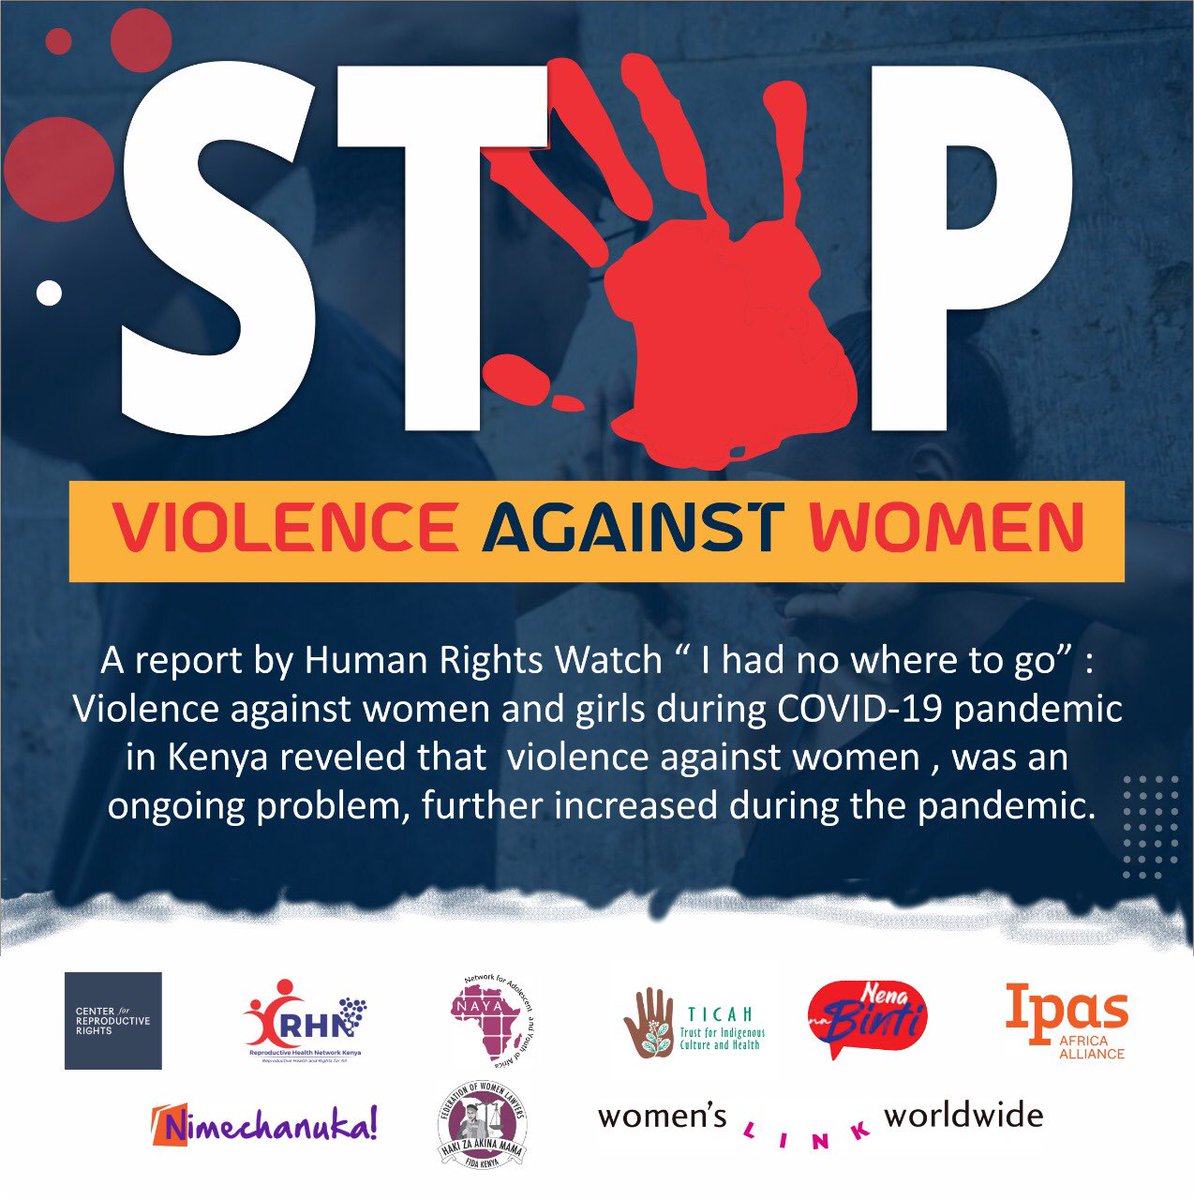 Sexual violence continues to be a hidden pandemic. According to the Gender Based Violence Recovery Centre, “1 in 3 Kenyan females has experienced an episode of sexual violence before the age of 18” while between 39% & 47% women experience GBV in their lifetime. #DefendHerRightsKE